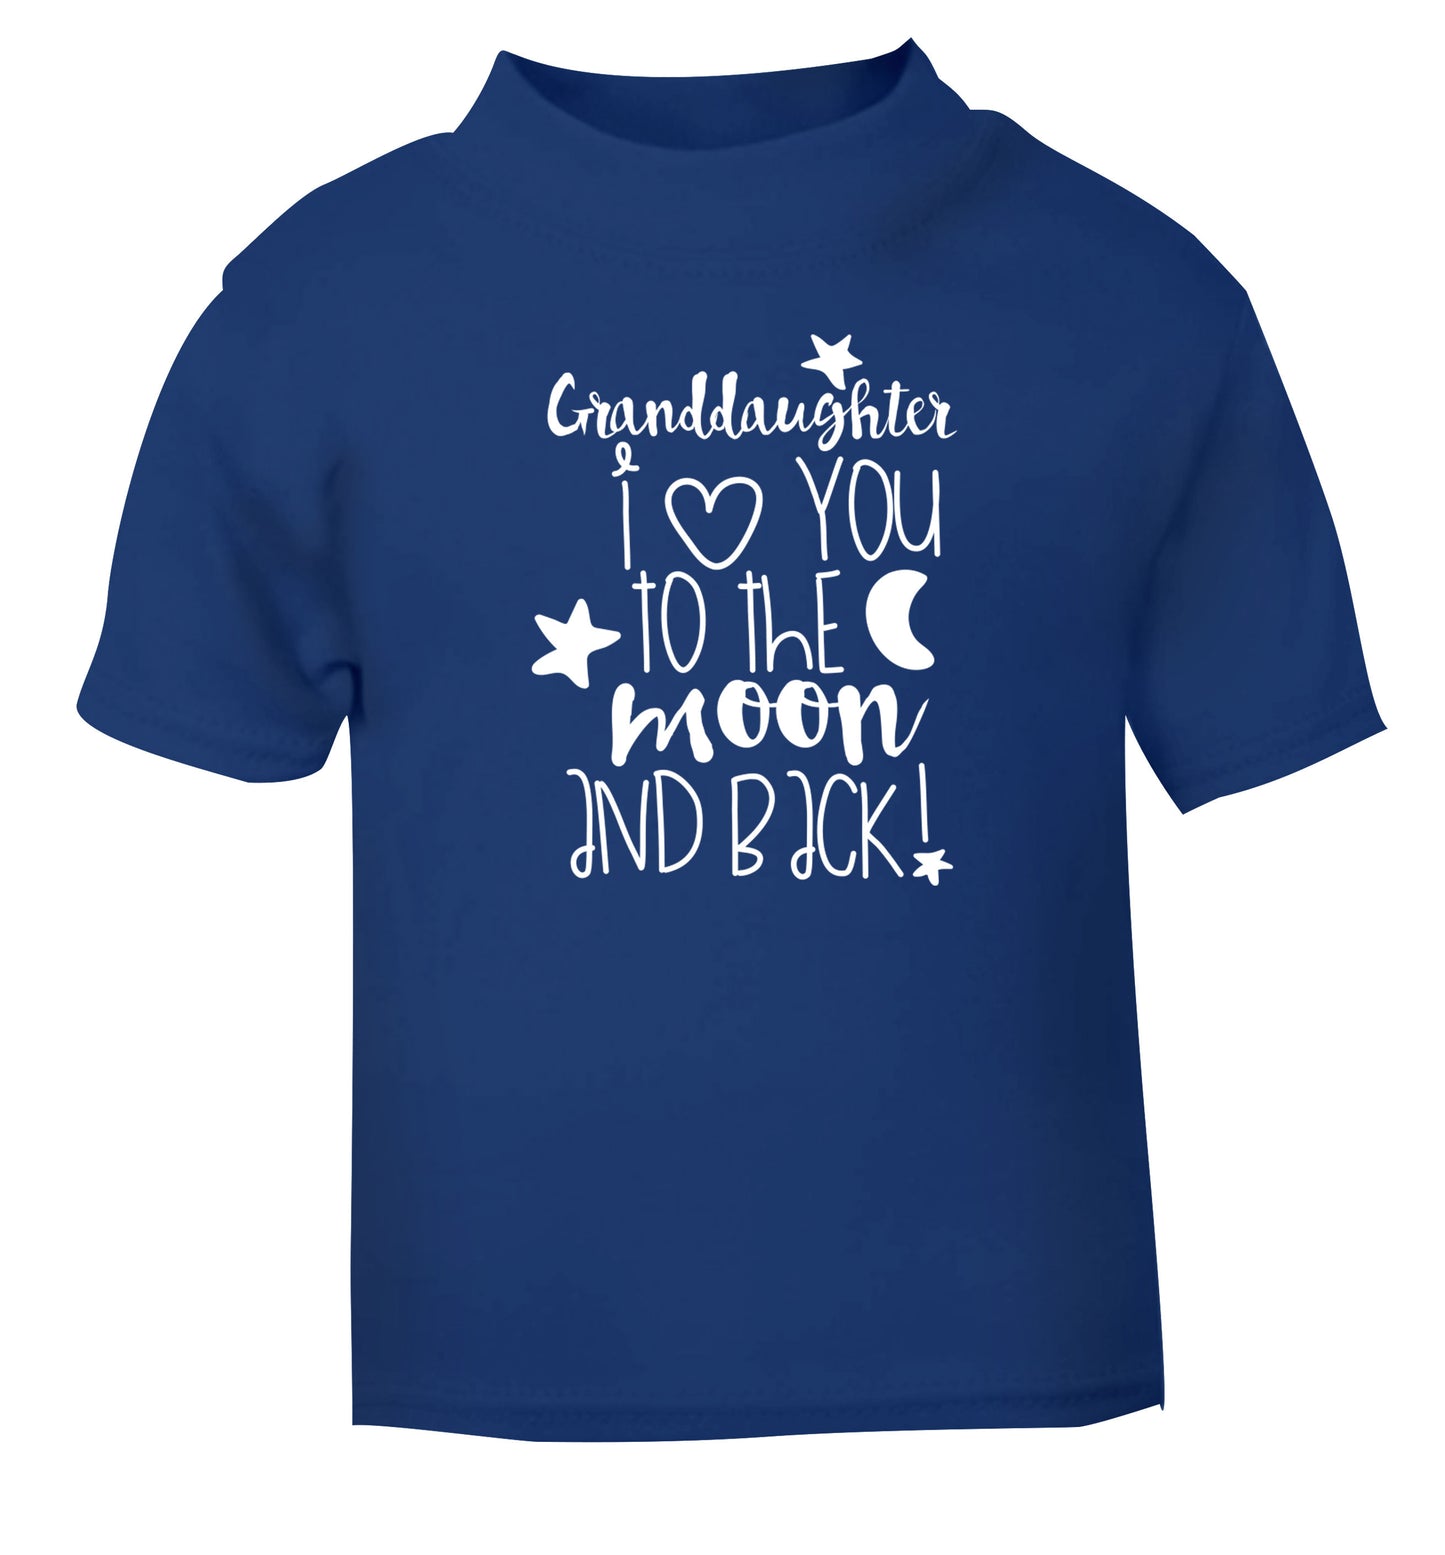 Granddaughter I love you to the moon and back blue Baby Toddler Tshirt 2 Years